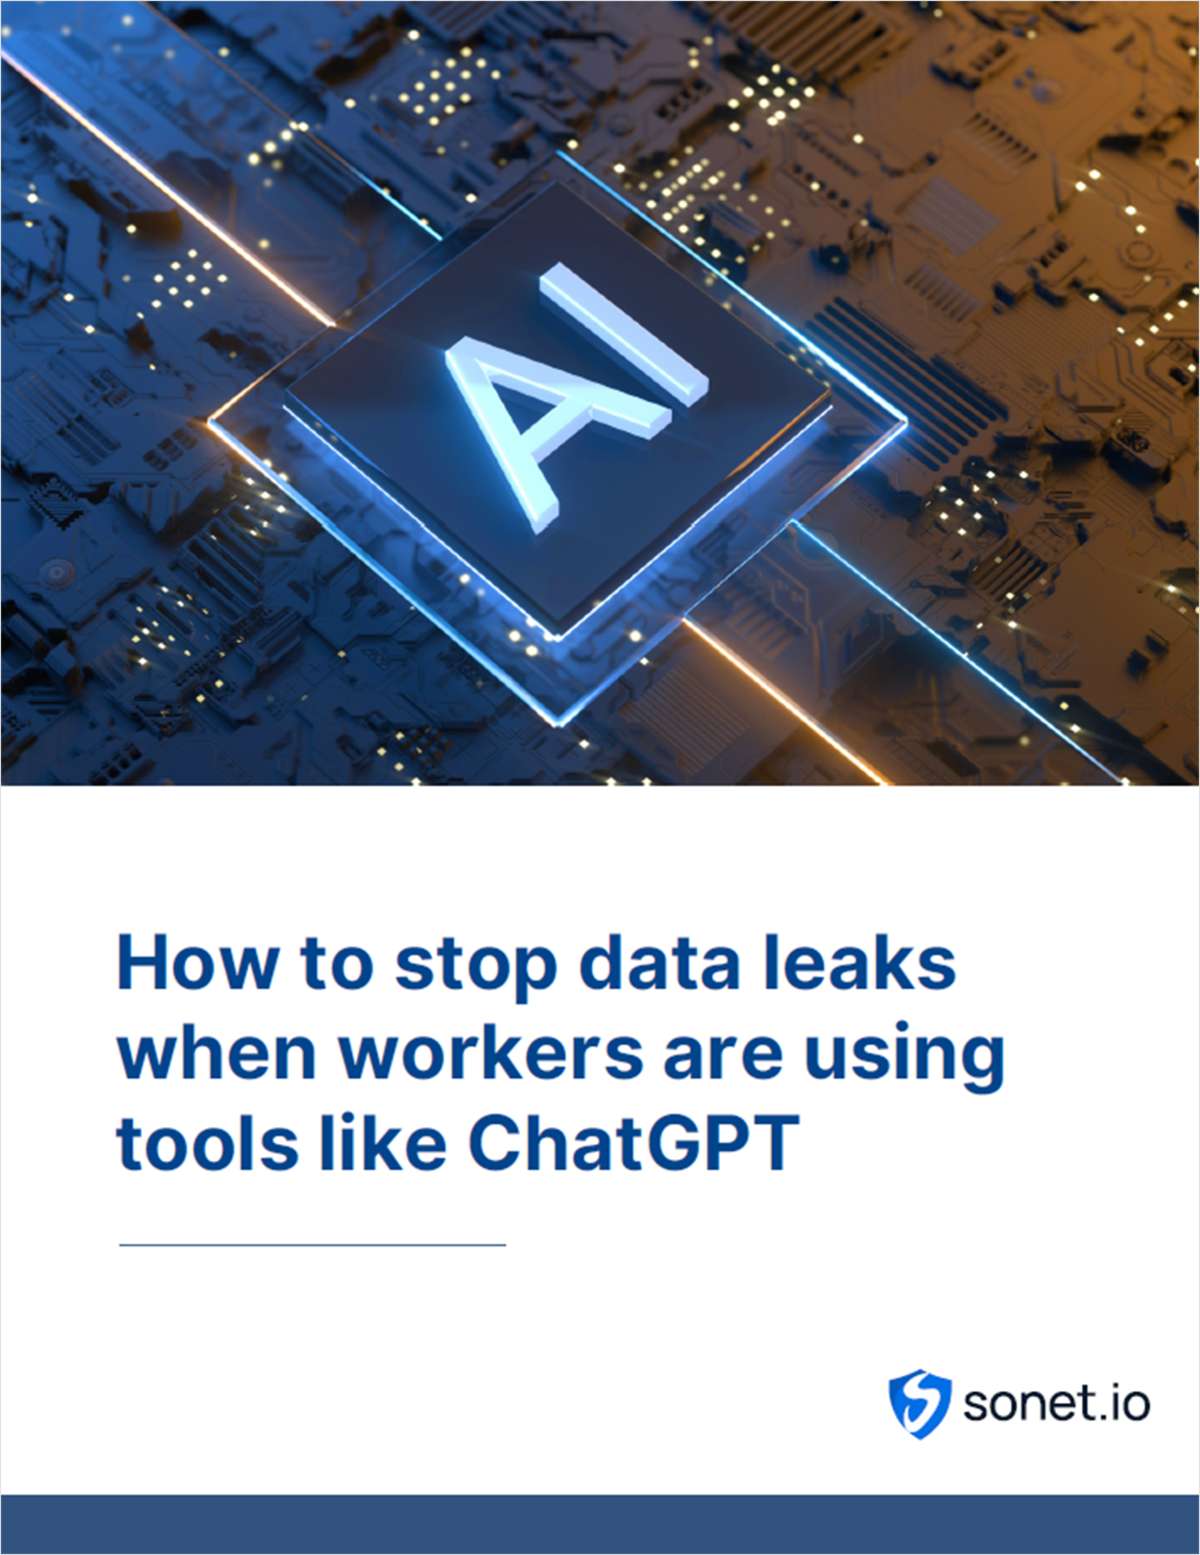 How to Stop Data Leaks When Workers Are Using Tools Like ChatGPT